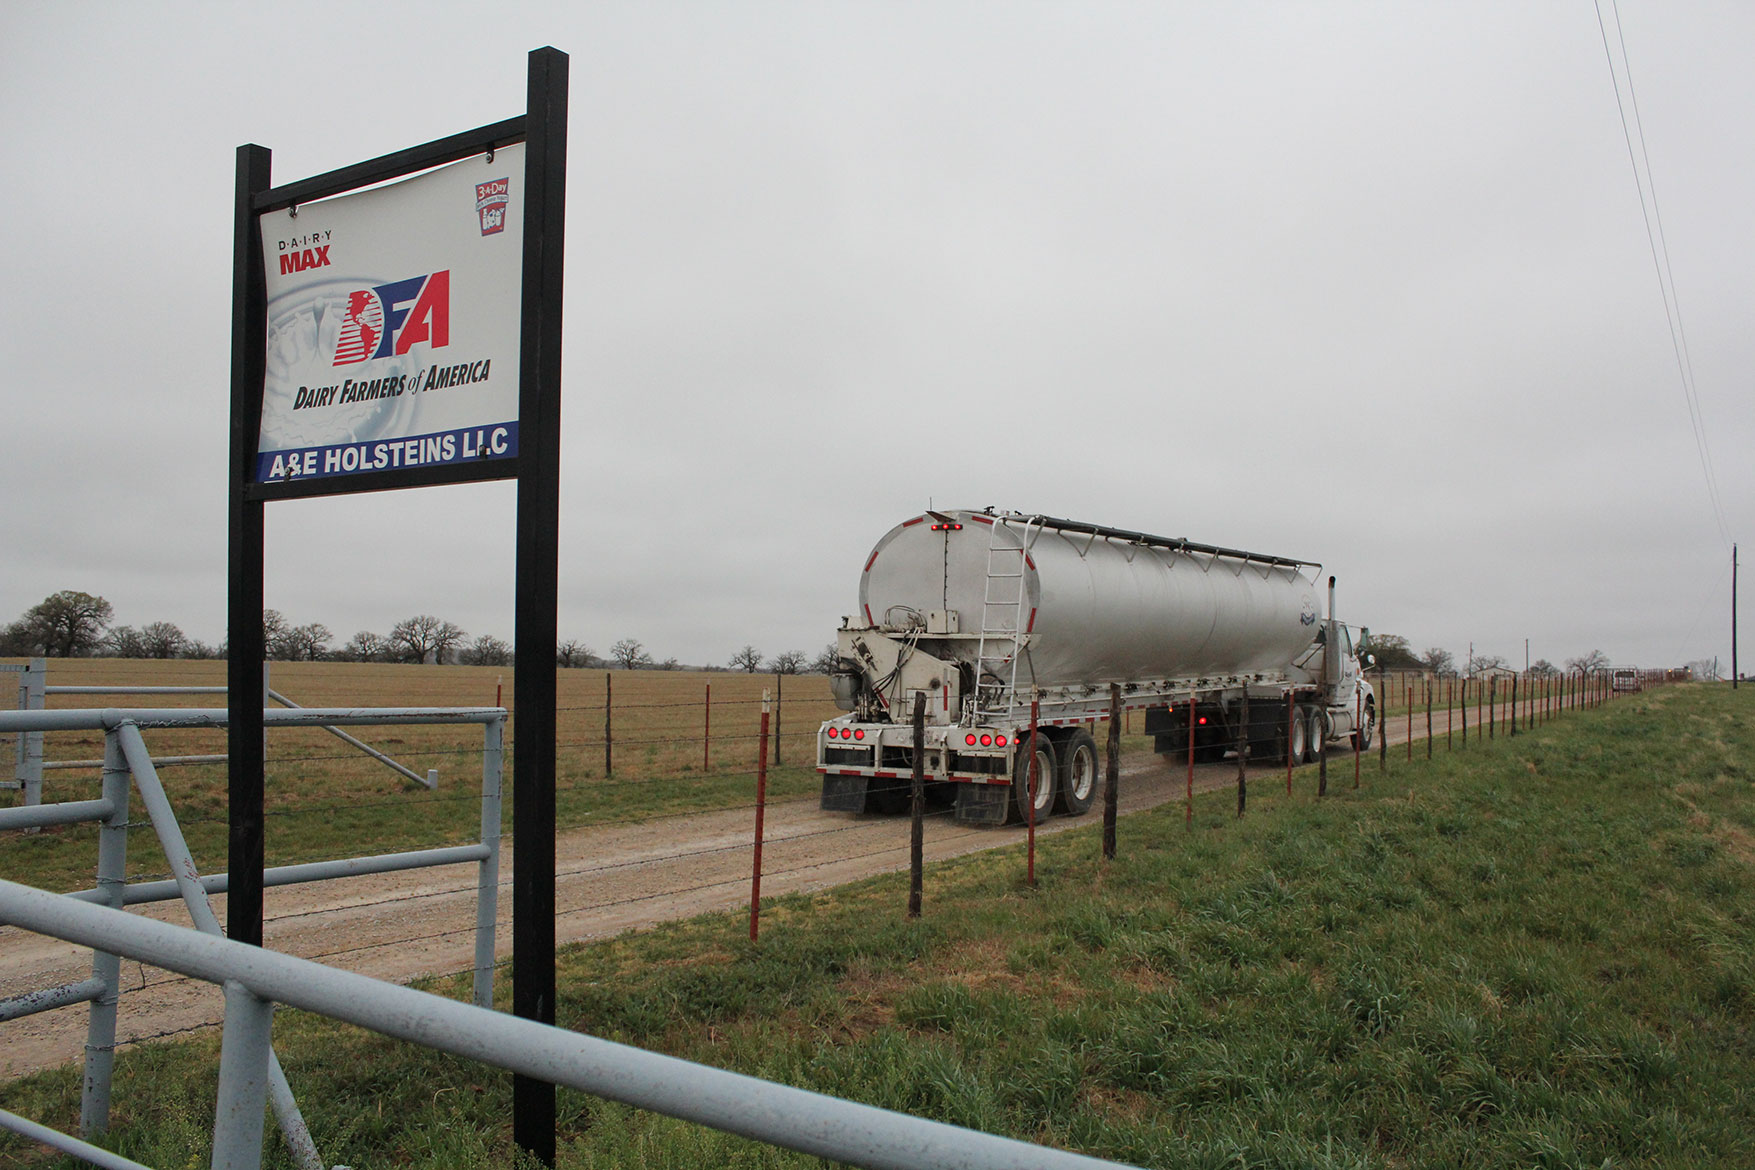 The feed truck delivers feed ingredients to the dairy farm.